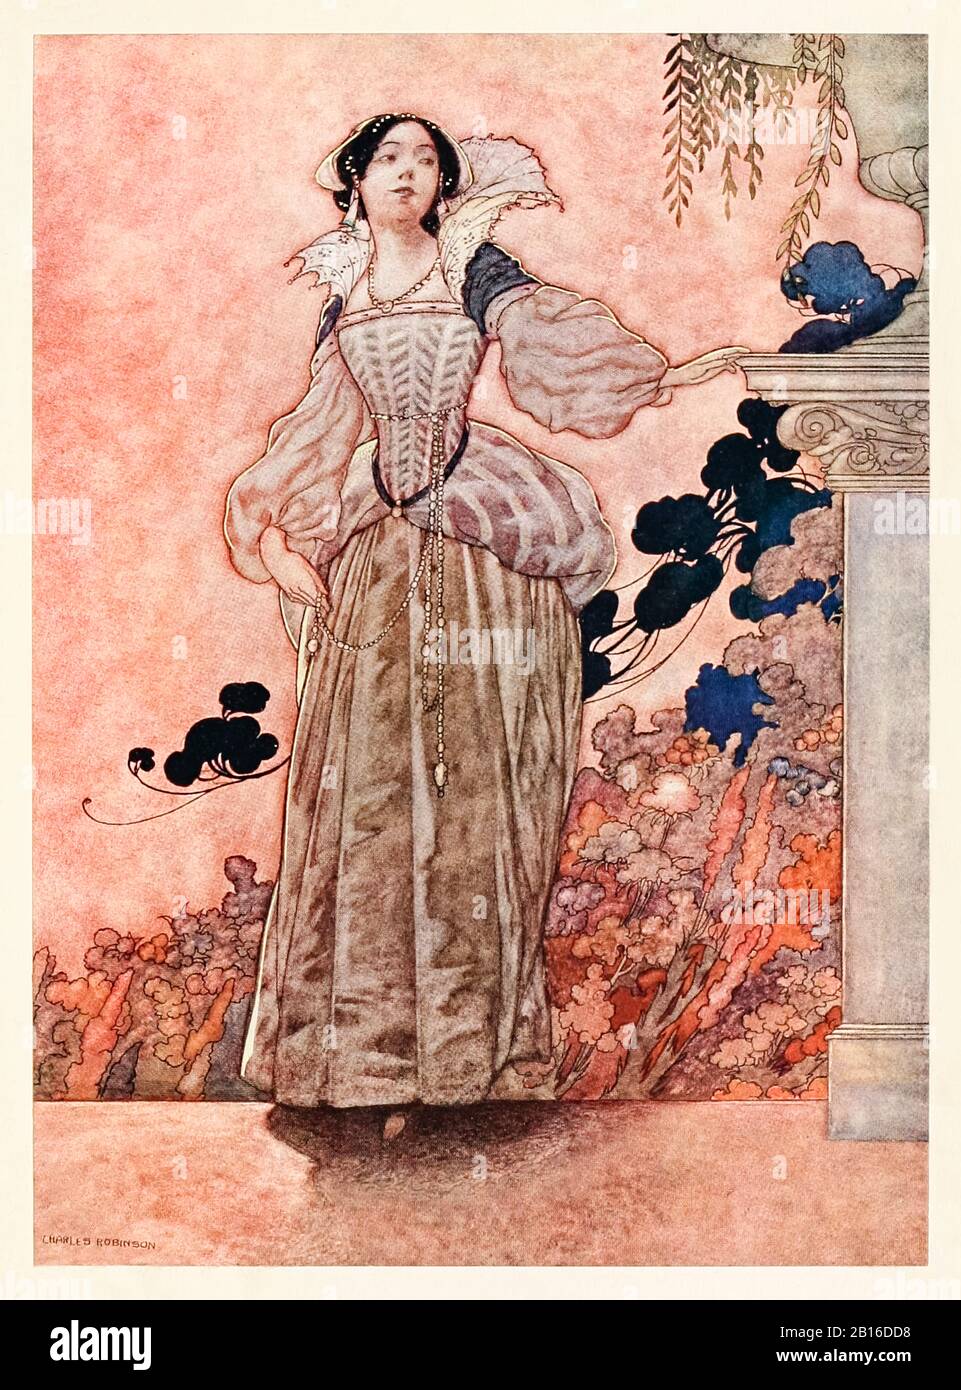 “My mistress’ brows are raven black” from ‘Of His Lady Love’ in The Songs and Sonnets of William Shakespeare illustrated by Charles Robinson (1870-1937). See more information below. Stock Photo